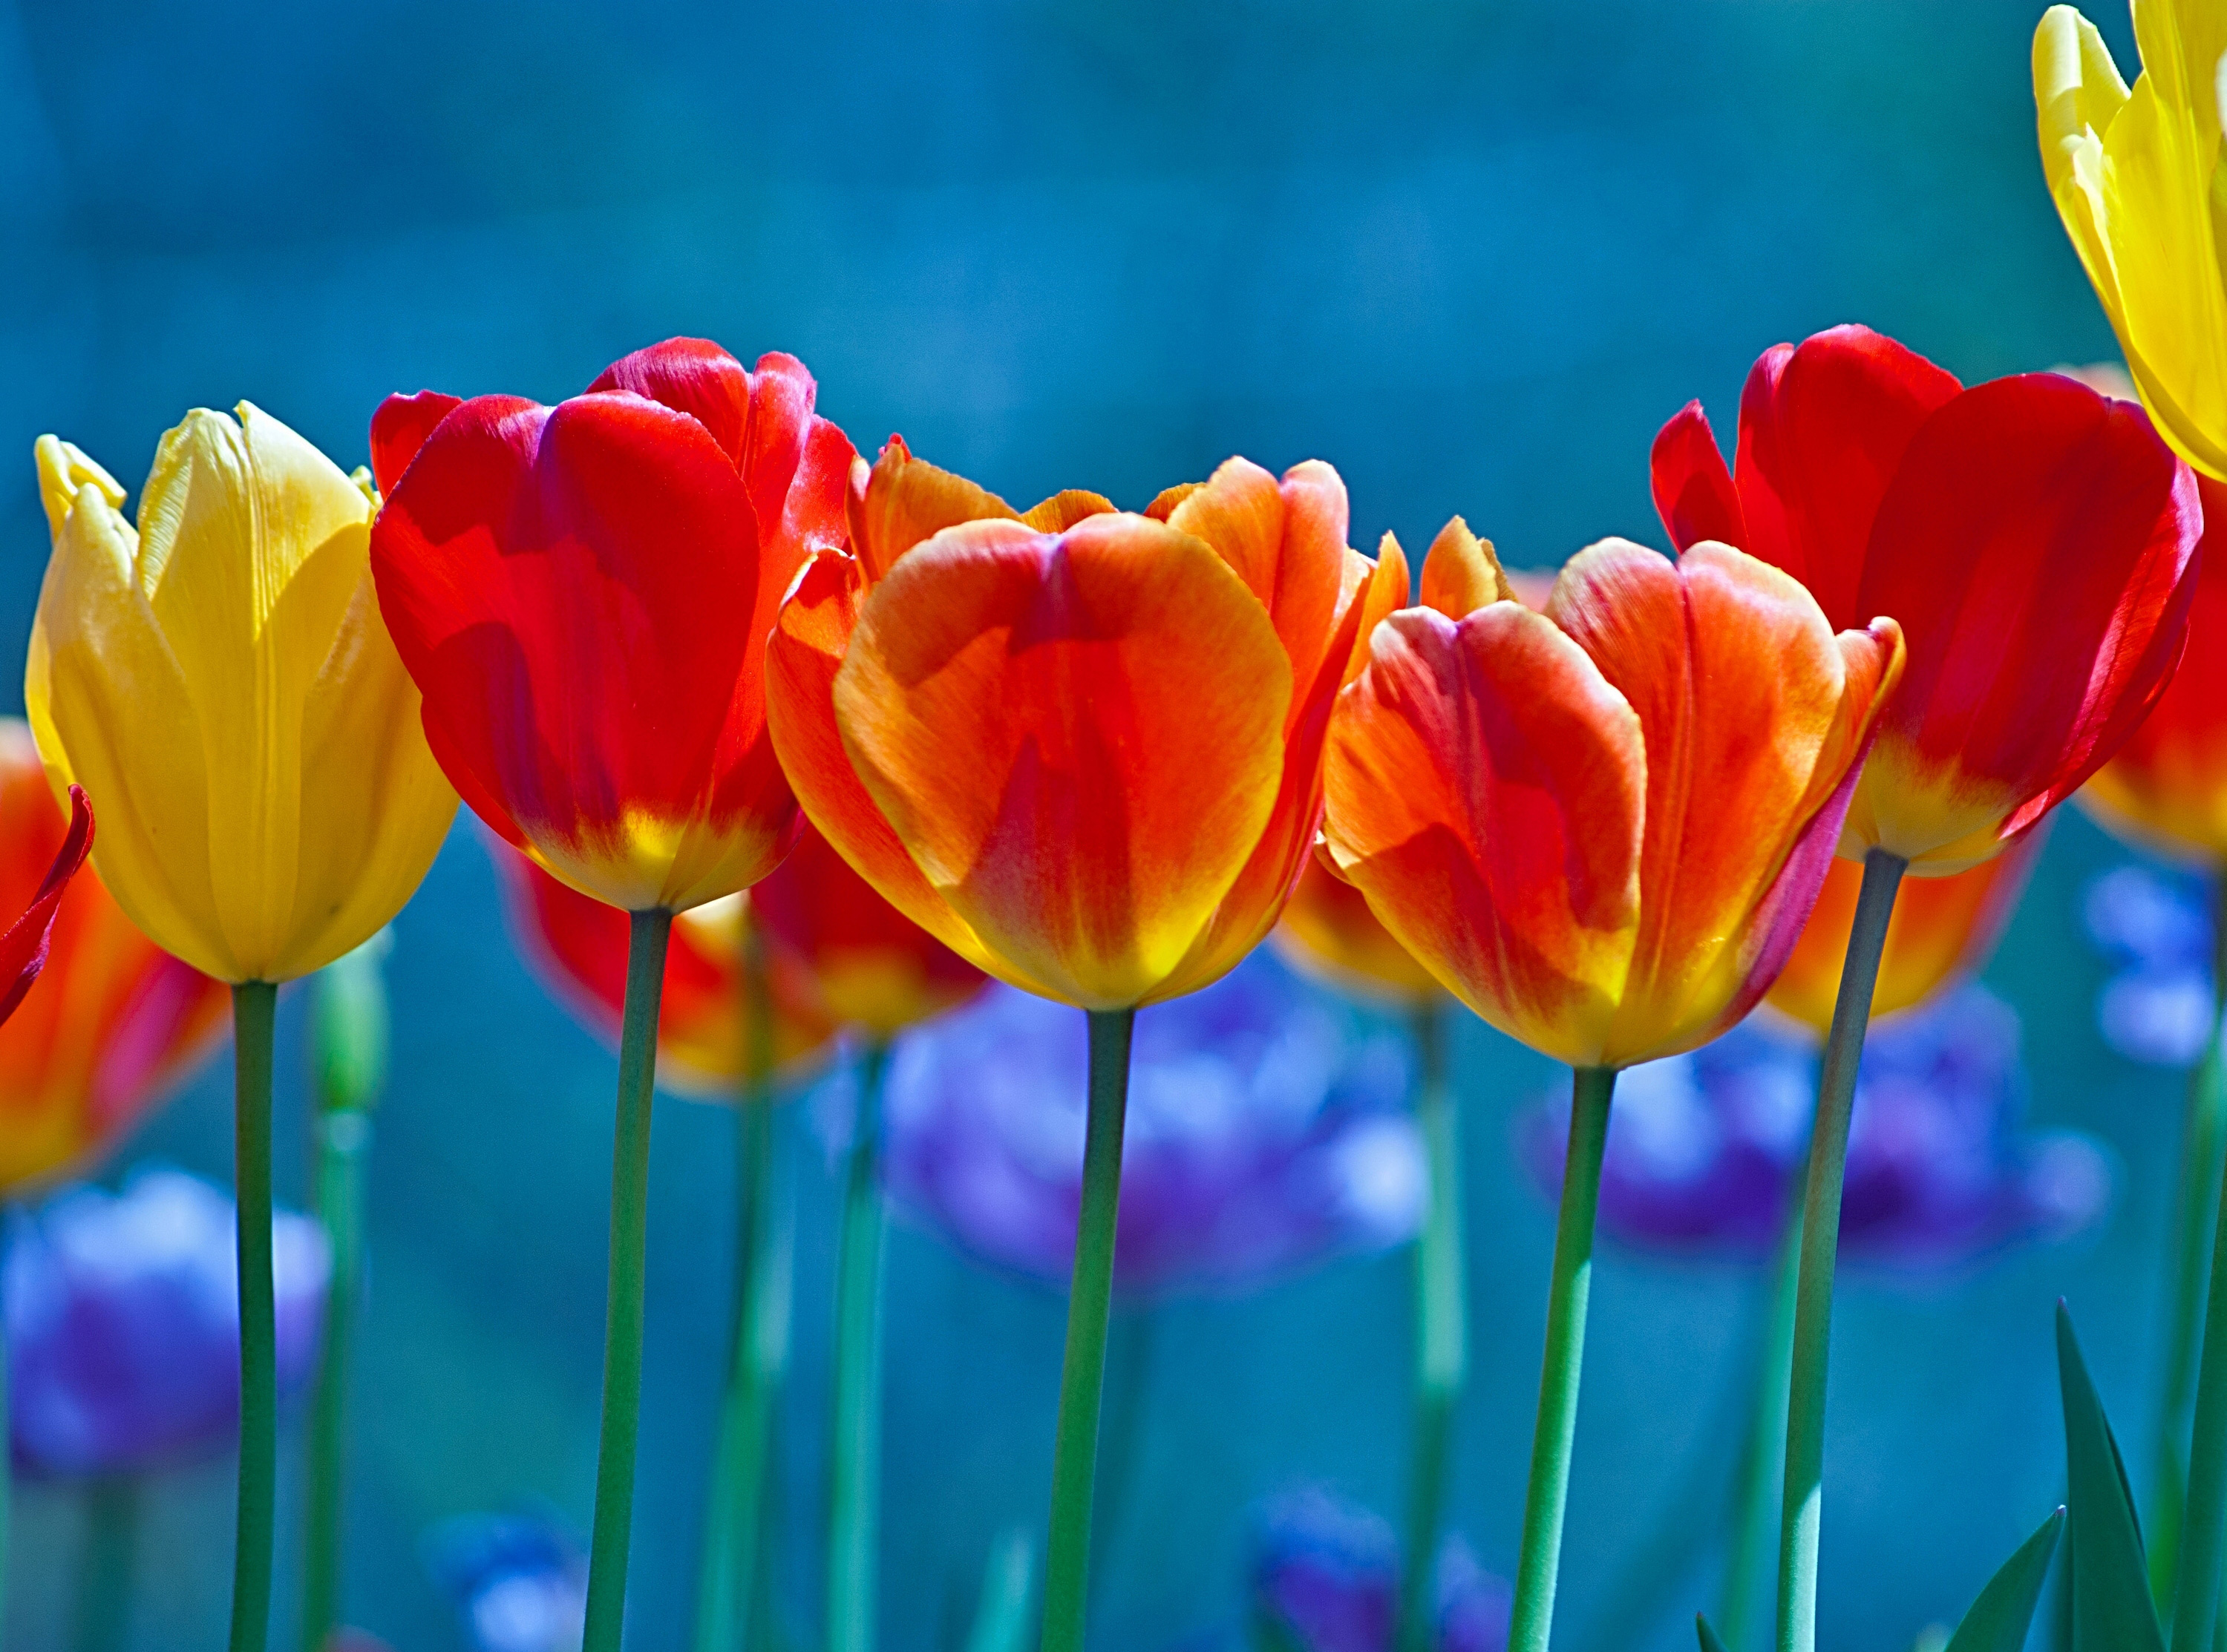 Download Brightly Colored Tulips, HD Flowers, 4k Wallpapers, Images ...